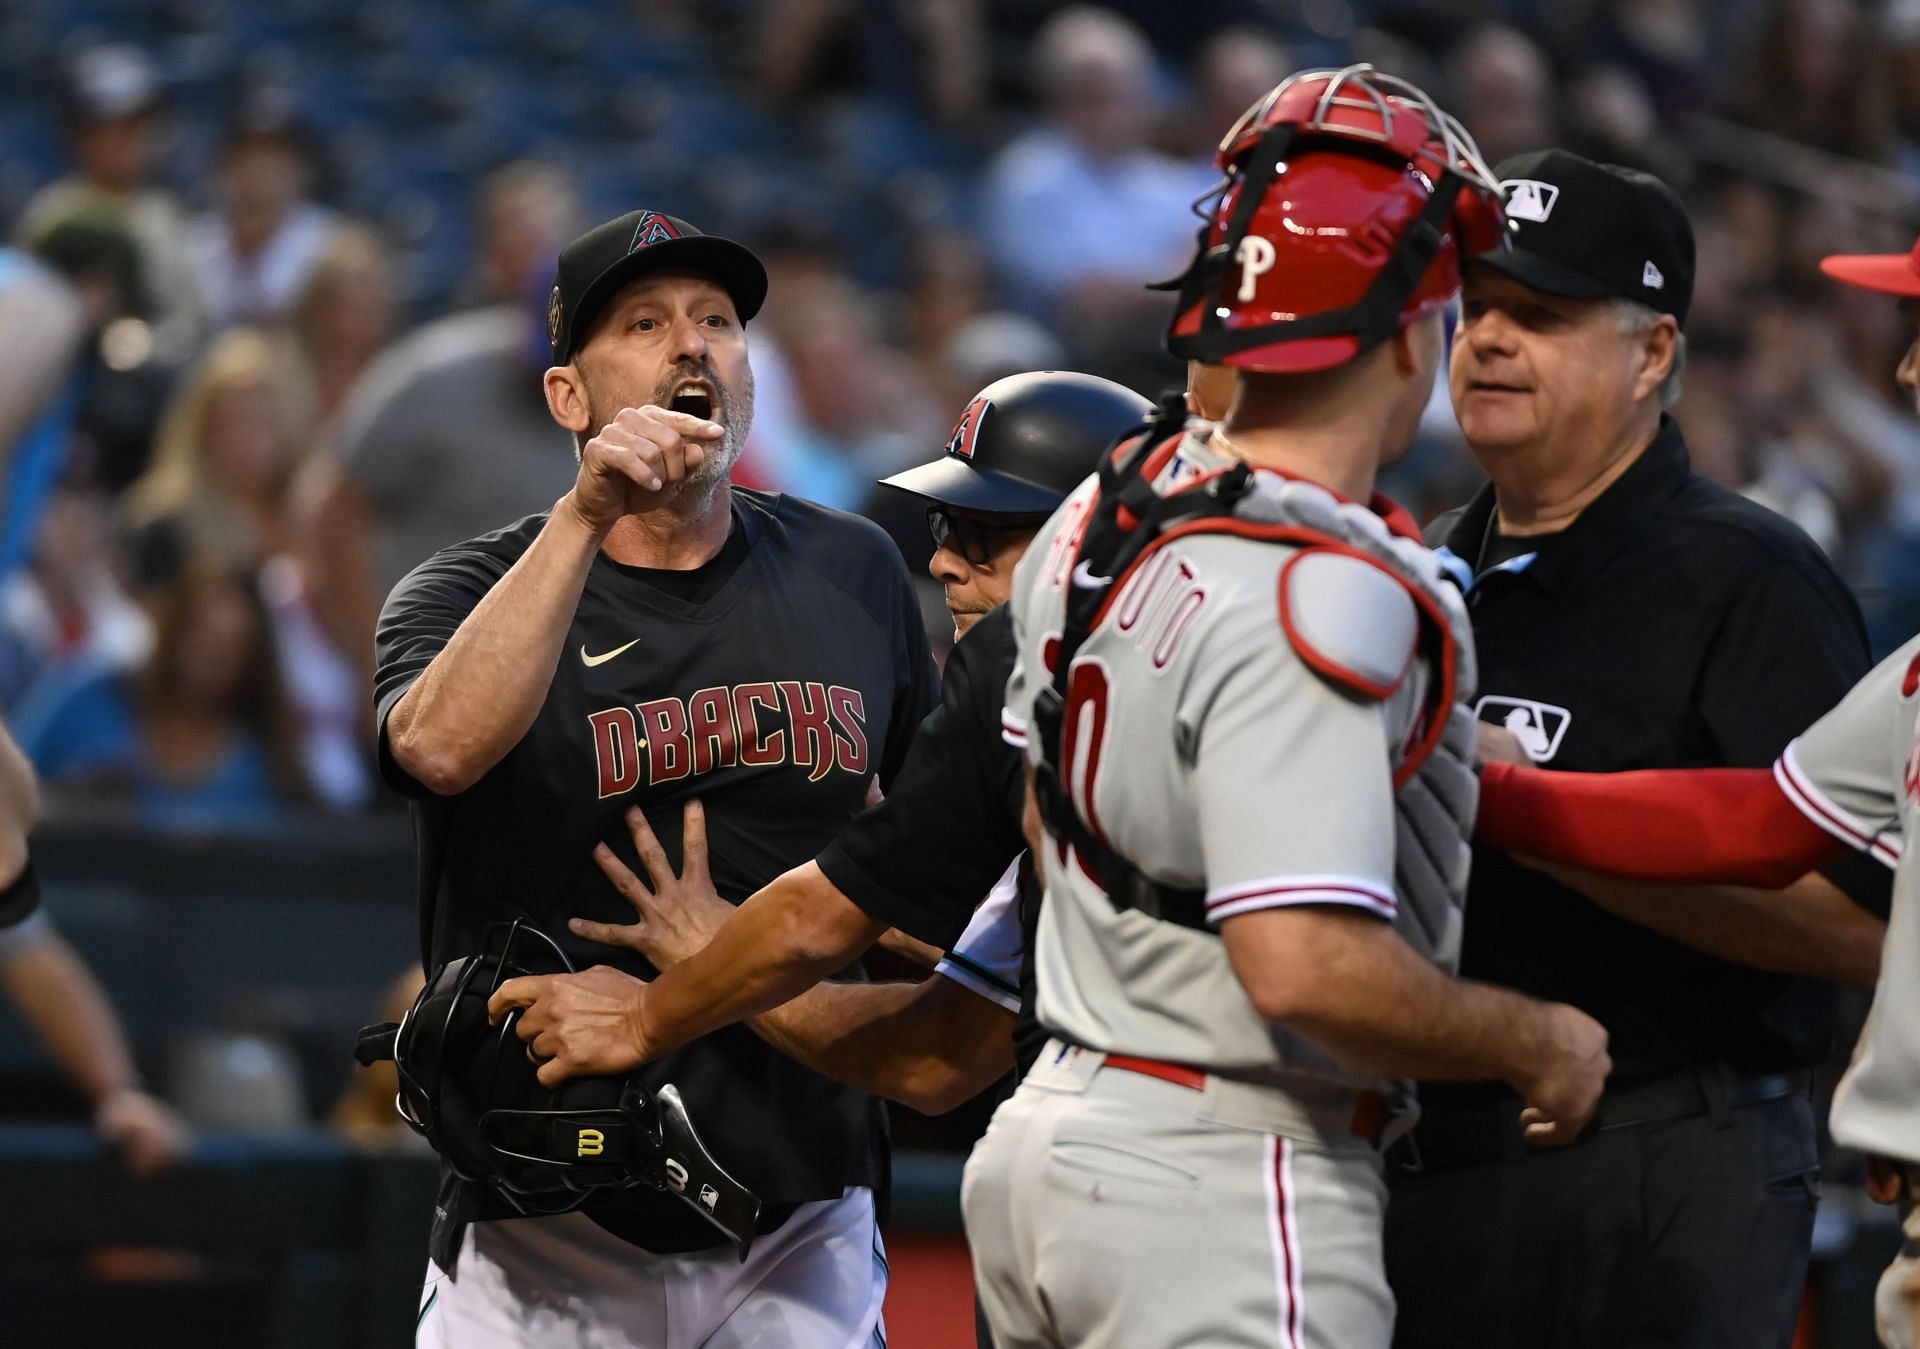 Molina, Lovullo each suspended 1 game for weekend fracas